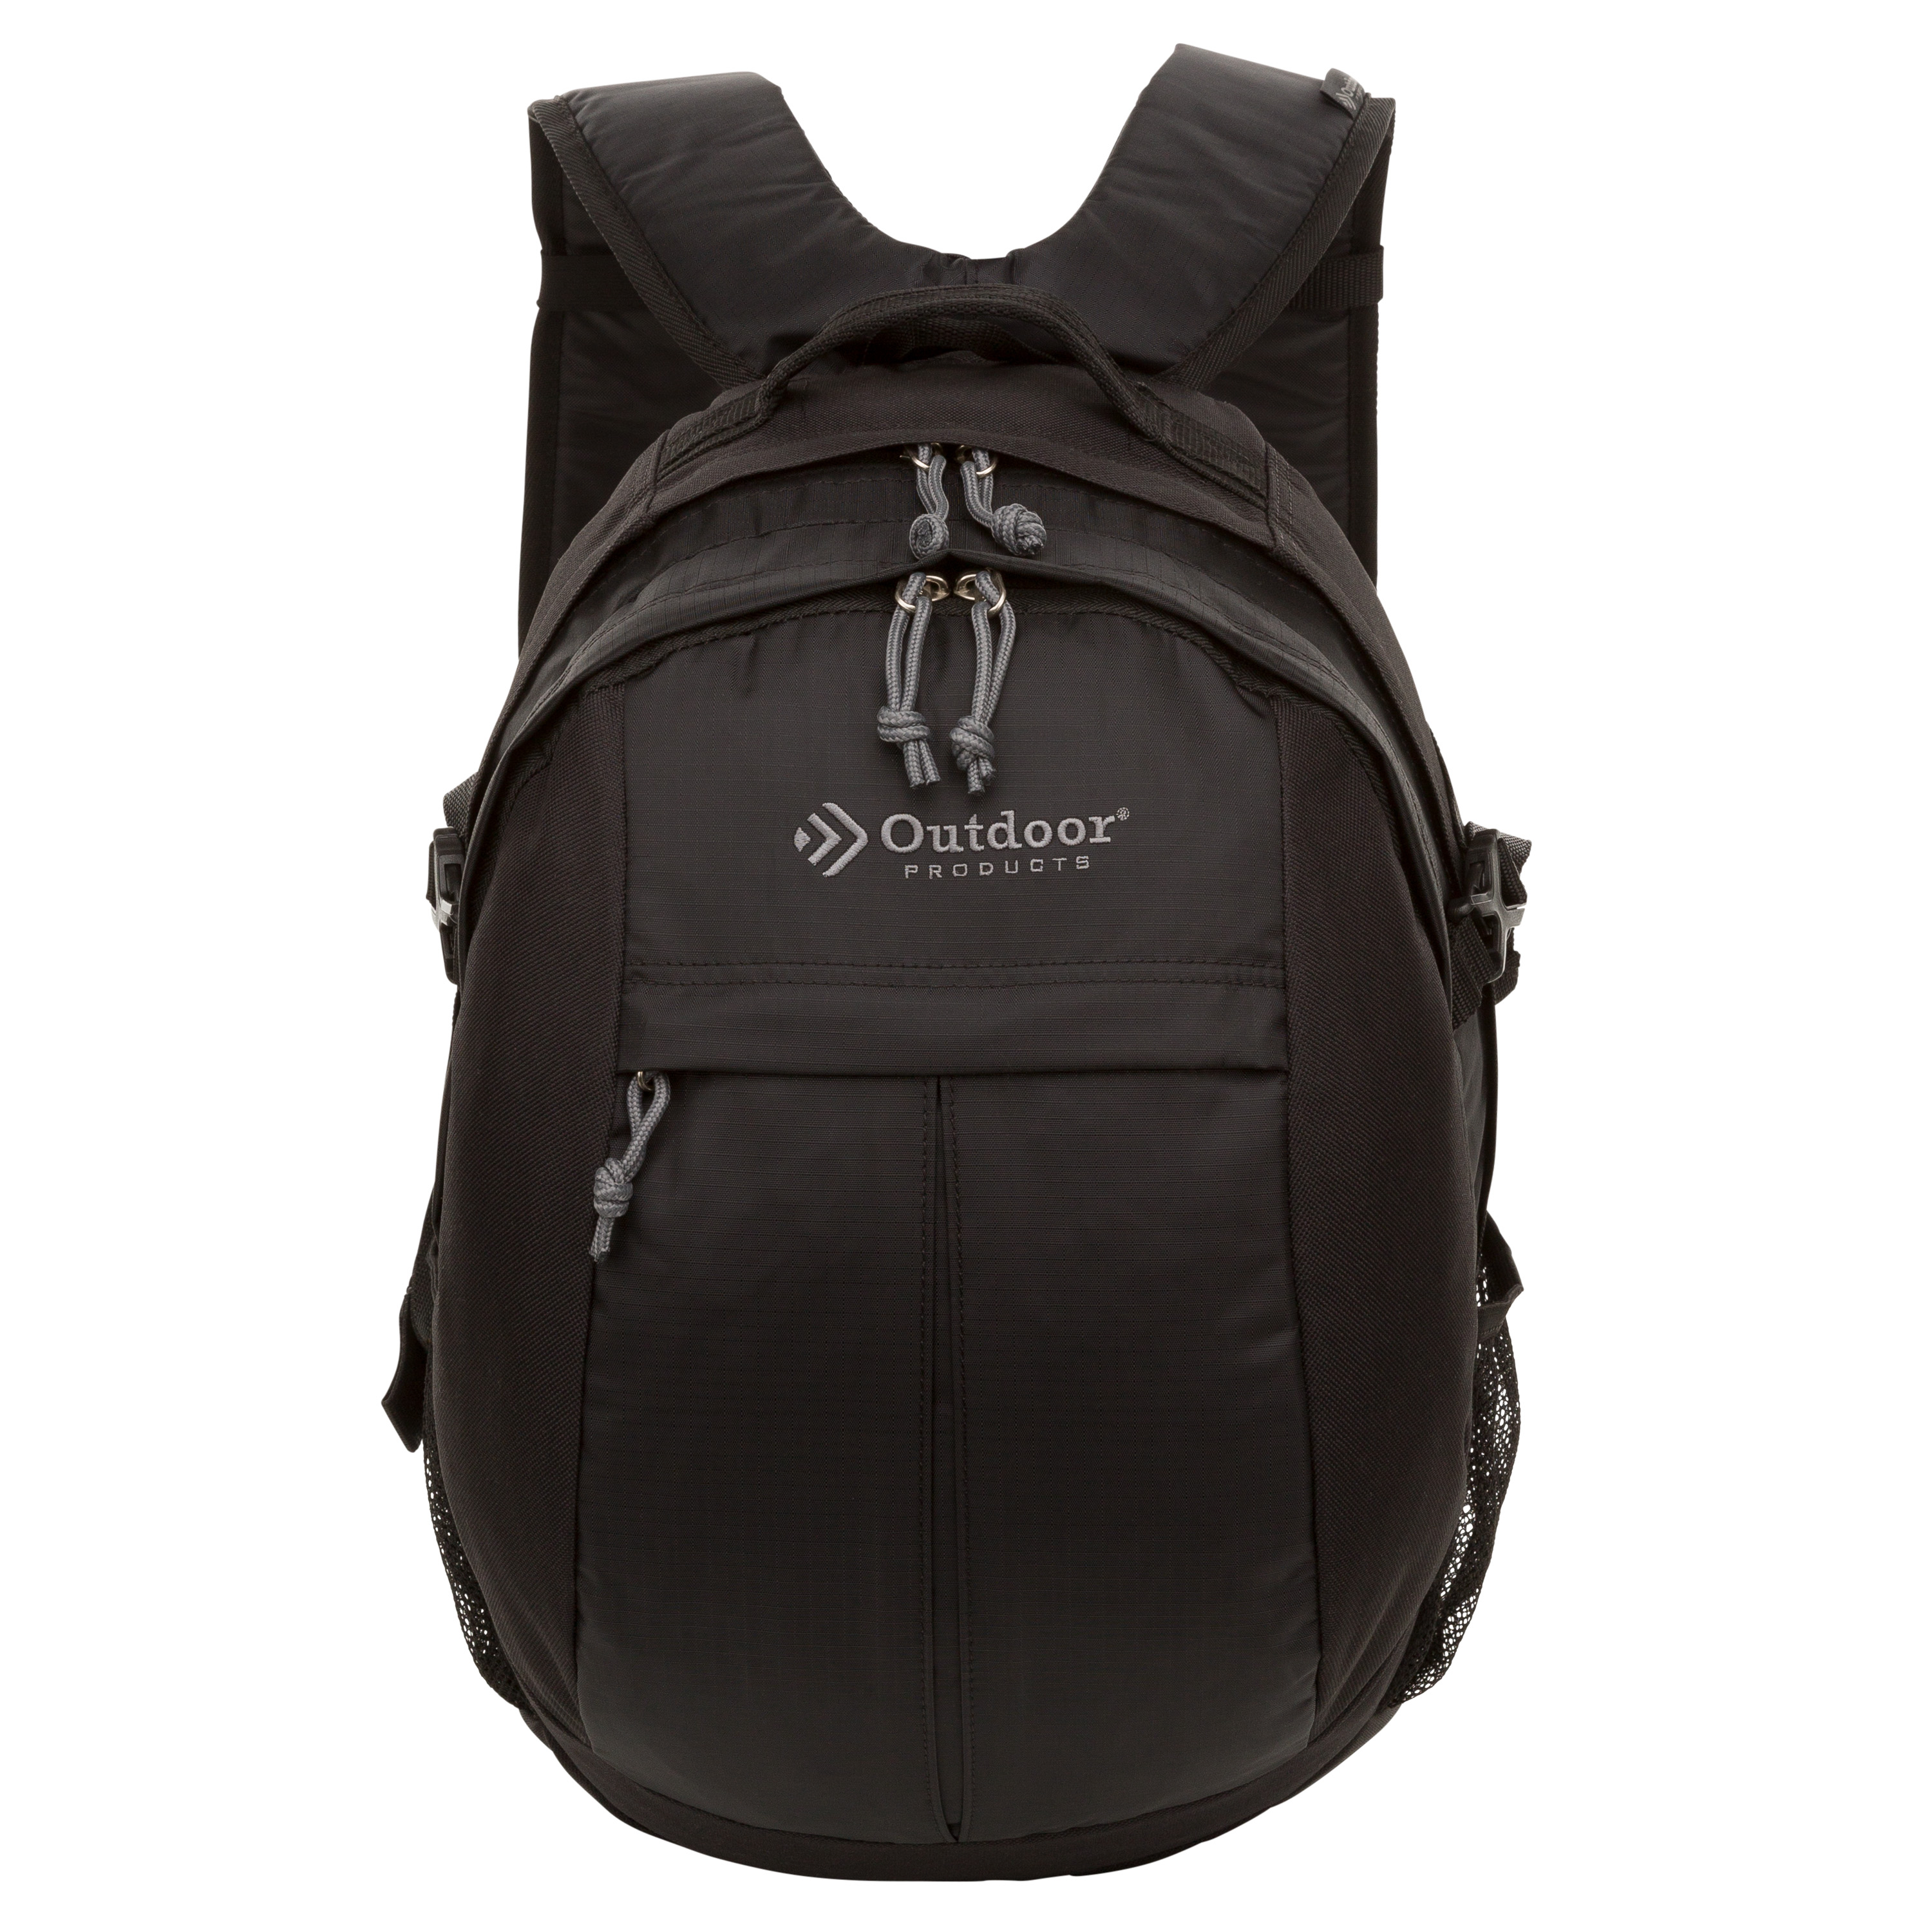 Outdoor Products 25 Ltr Traverse Backpack, Black, Unisex, Adult, Teen, Polyester - image 5 of 15